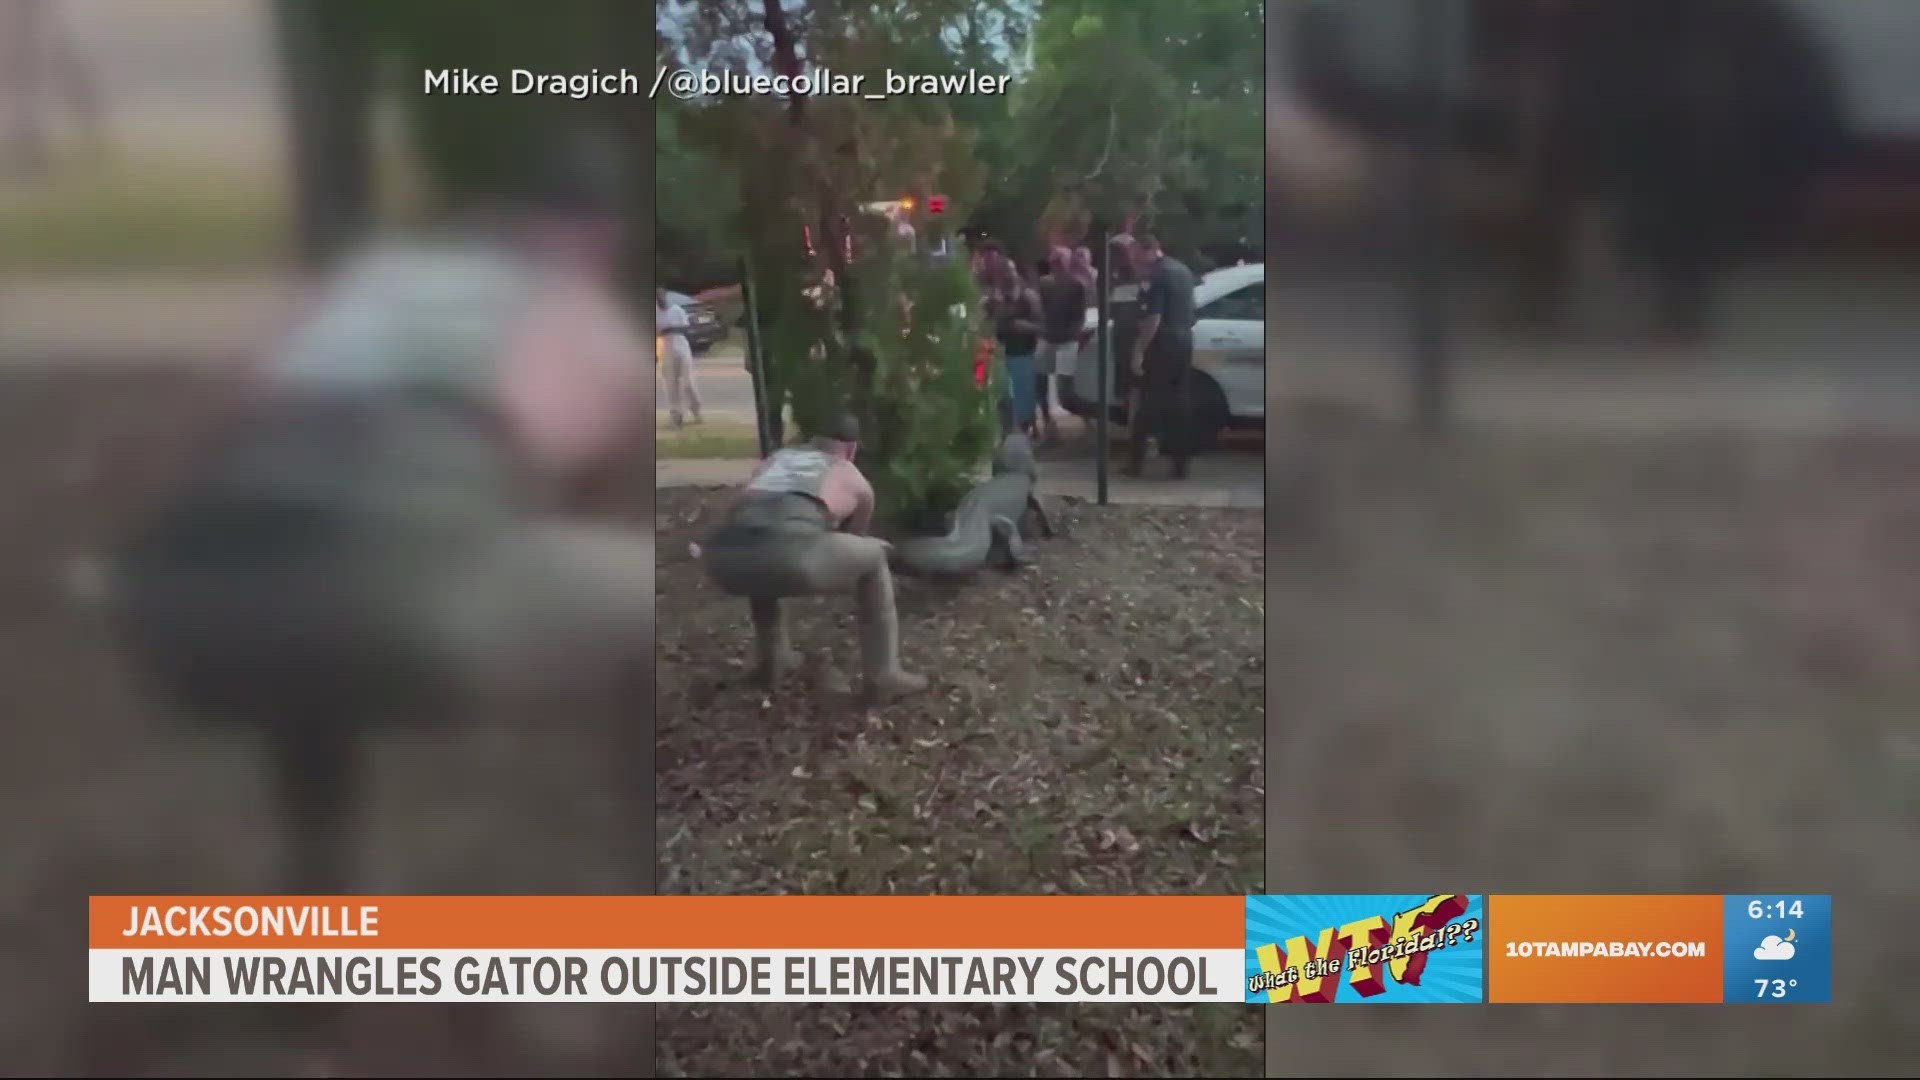 The MMA fighter and military veteran later harvested the gator for meat that he reportedly plans to share with the community.